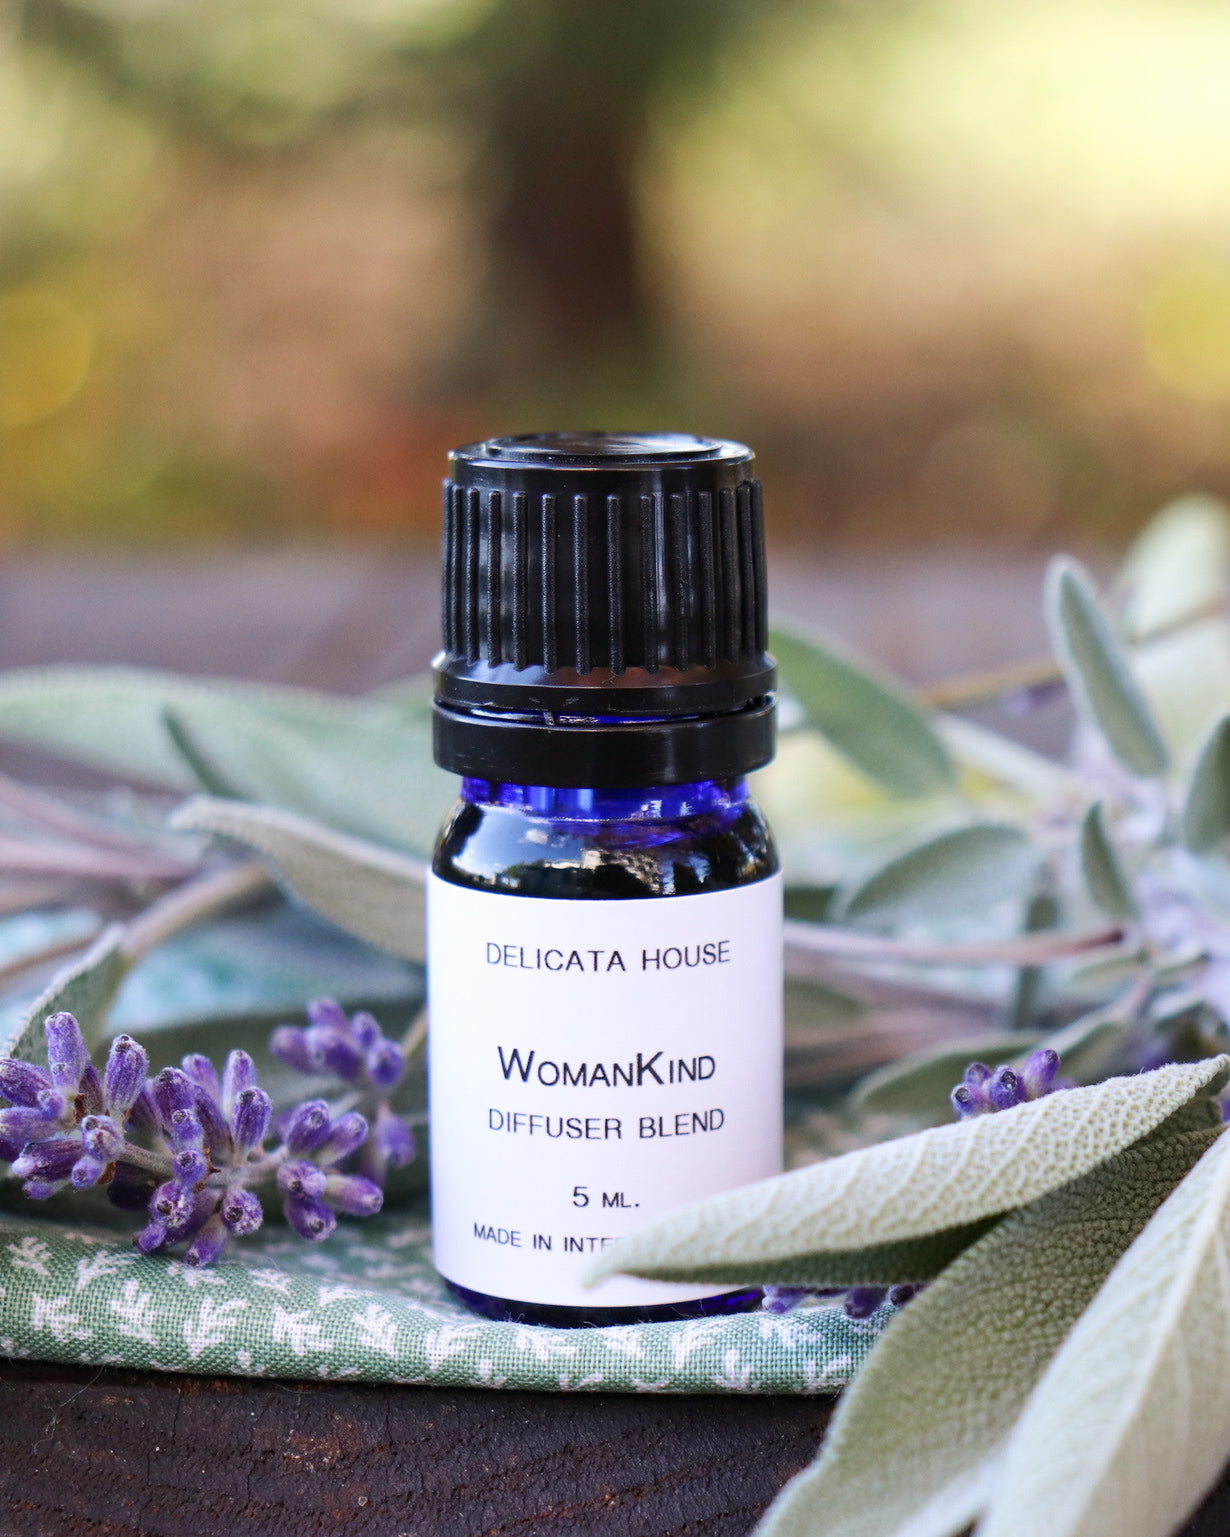 Aromatherapy Blend / PMS Care Aromatherapy Blend / Period Care Diffuser Blend / Women's PMS Essential Oil Blend / Natural PMS Relief / Calming Aromatherapy